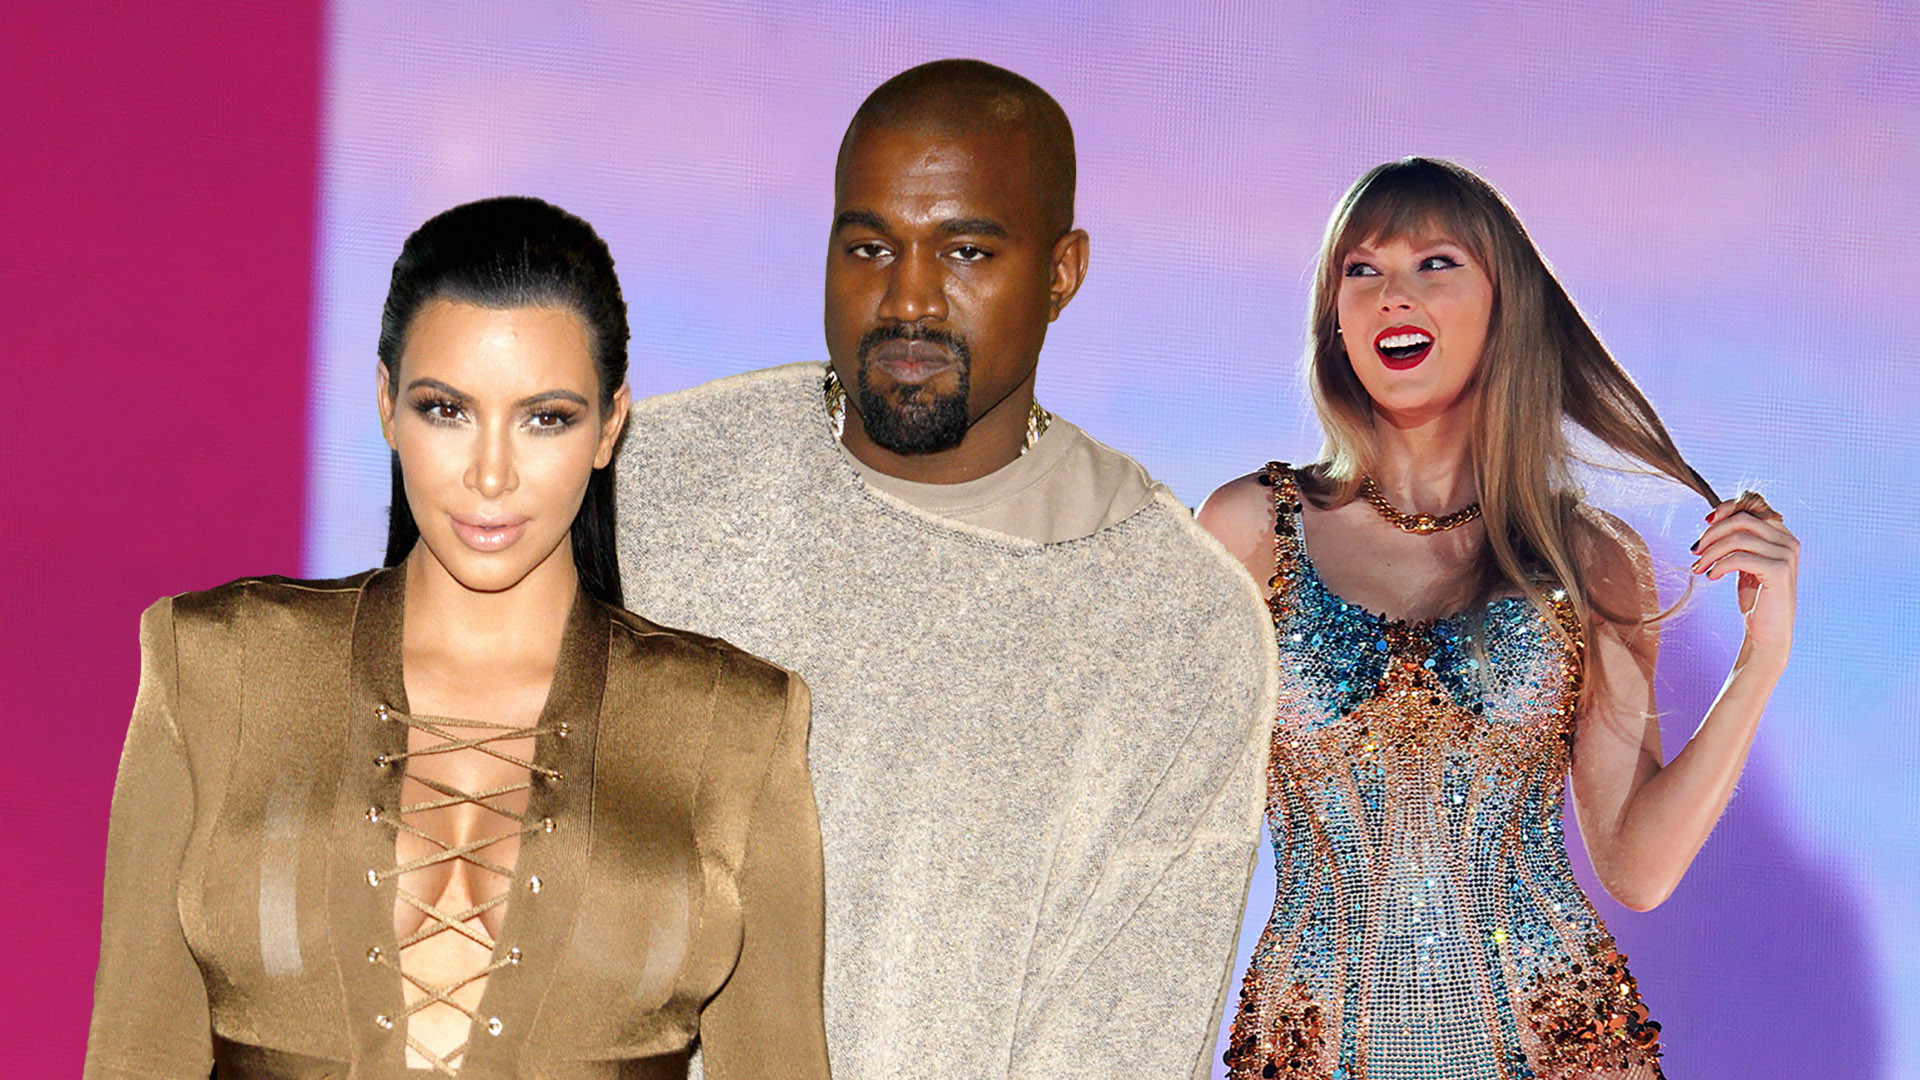 The Kanye VMAs Diss: Is the Swift-Kardashian Feud Still On After 14 Years?